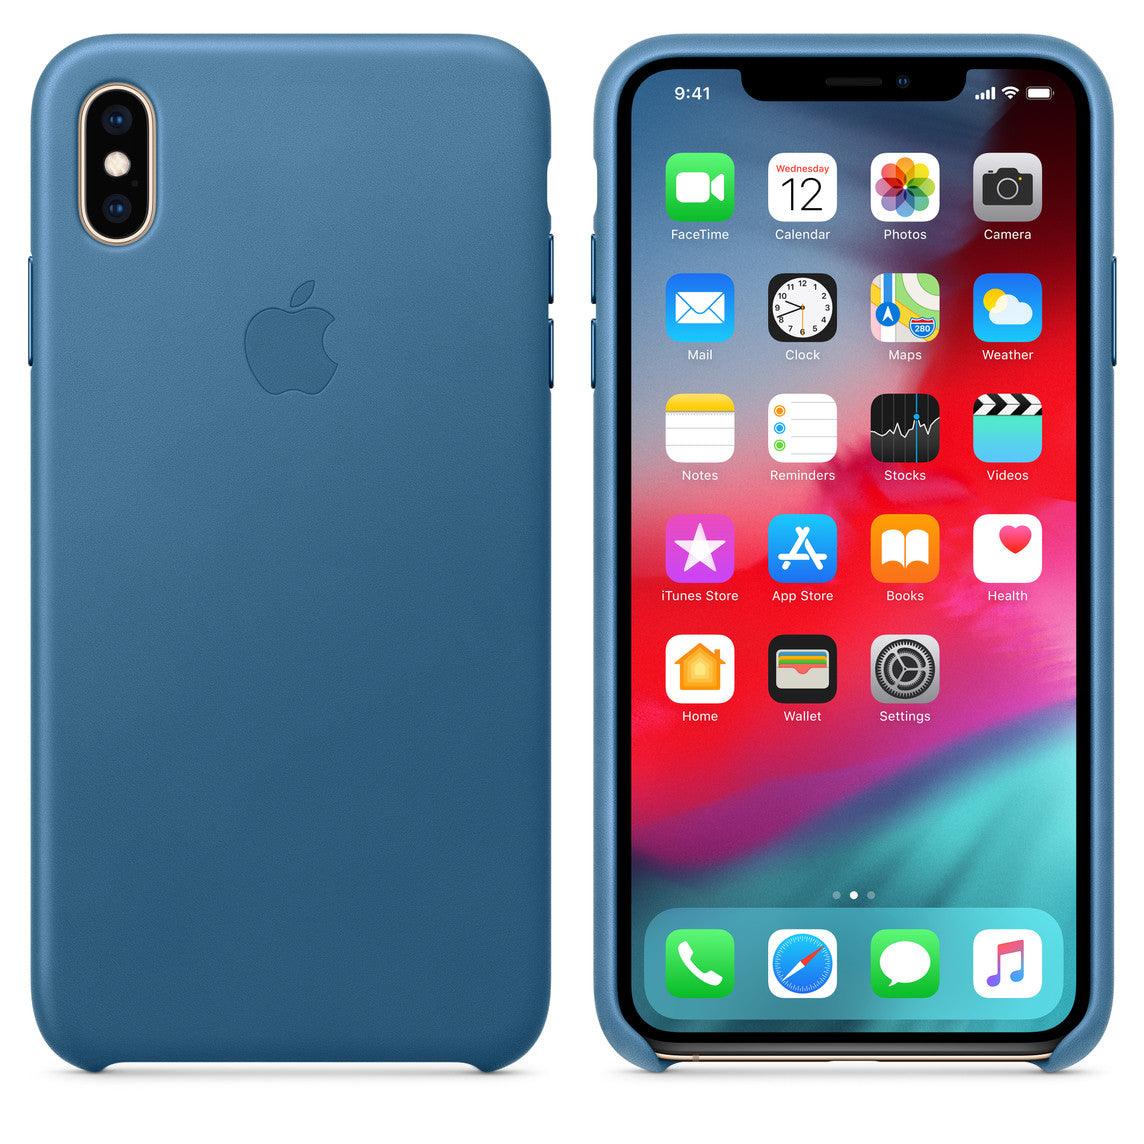 Apple iPhone XS Max Leather Case - Cape Cod Blue - iGadget Store